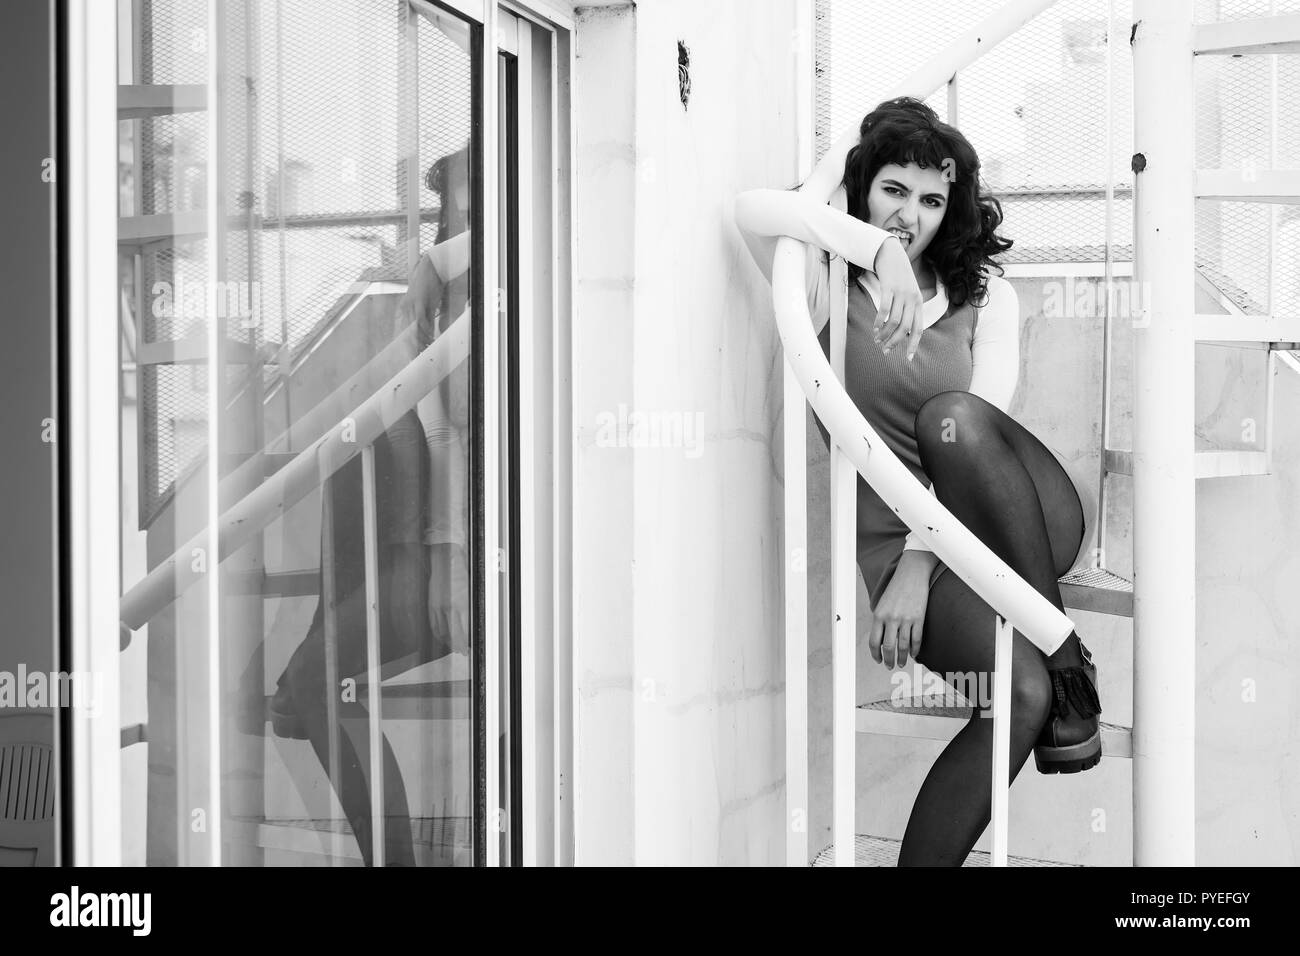 Portrait of a beautiful serious young woman in an elegant dress sitting on a metal stairs. Stock Photo